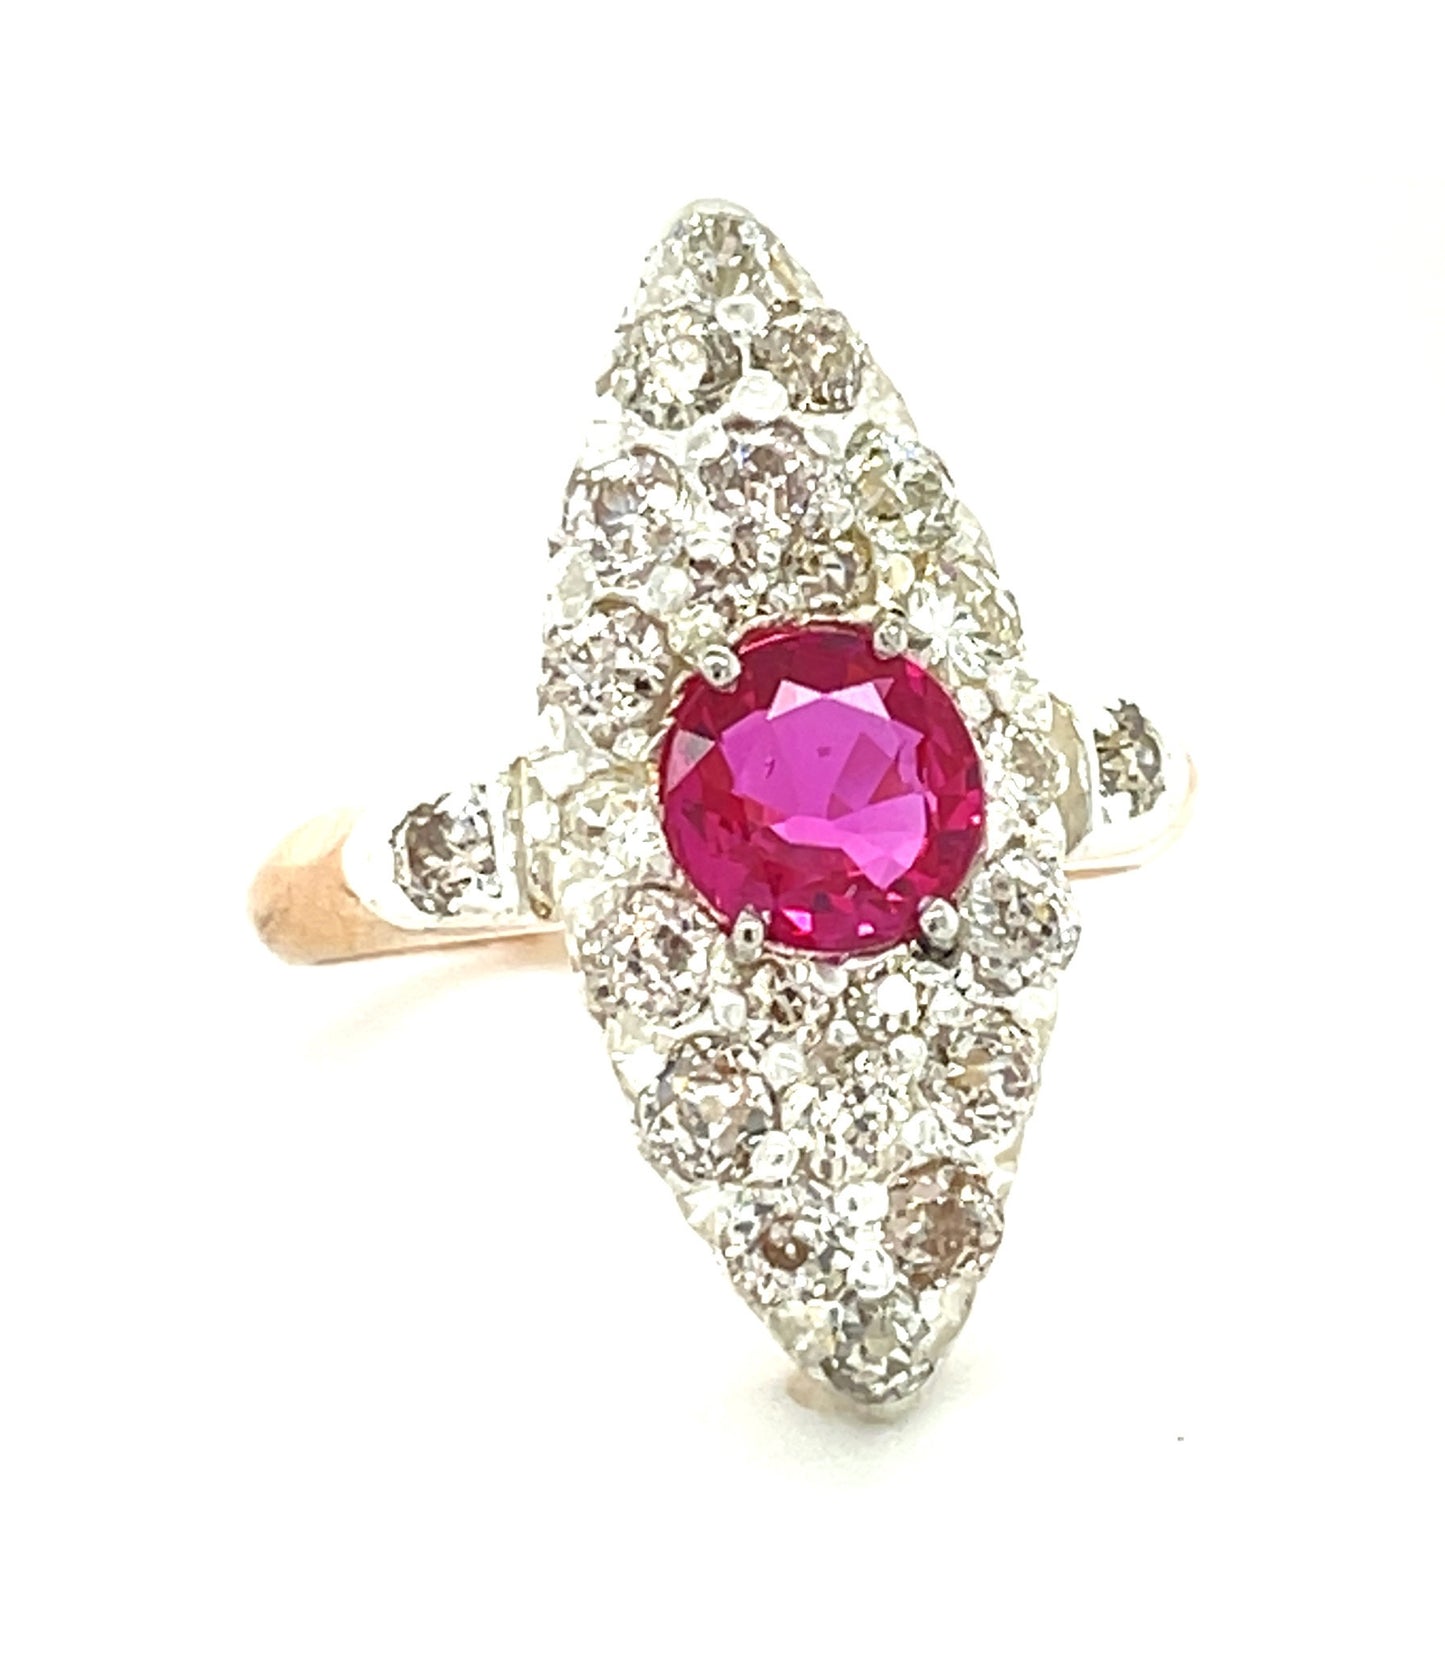 .80ct Ruby 1.25ct Old European Cut Diamond 14K+Silver Victorian Antique Ring (Circa 1880s) 7 Size 4.40gr